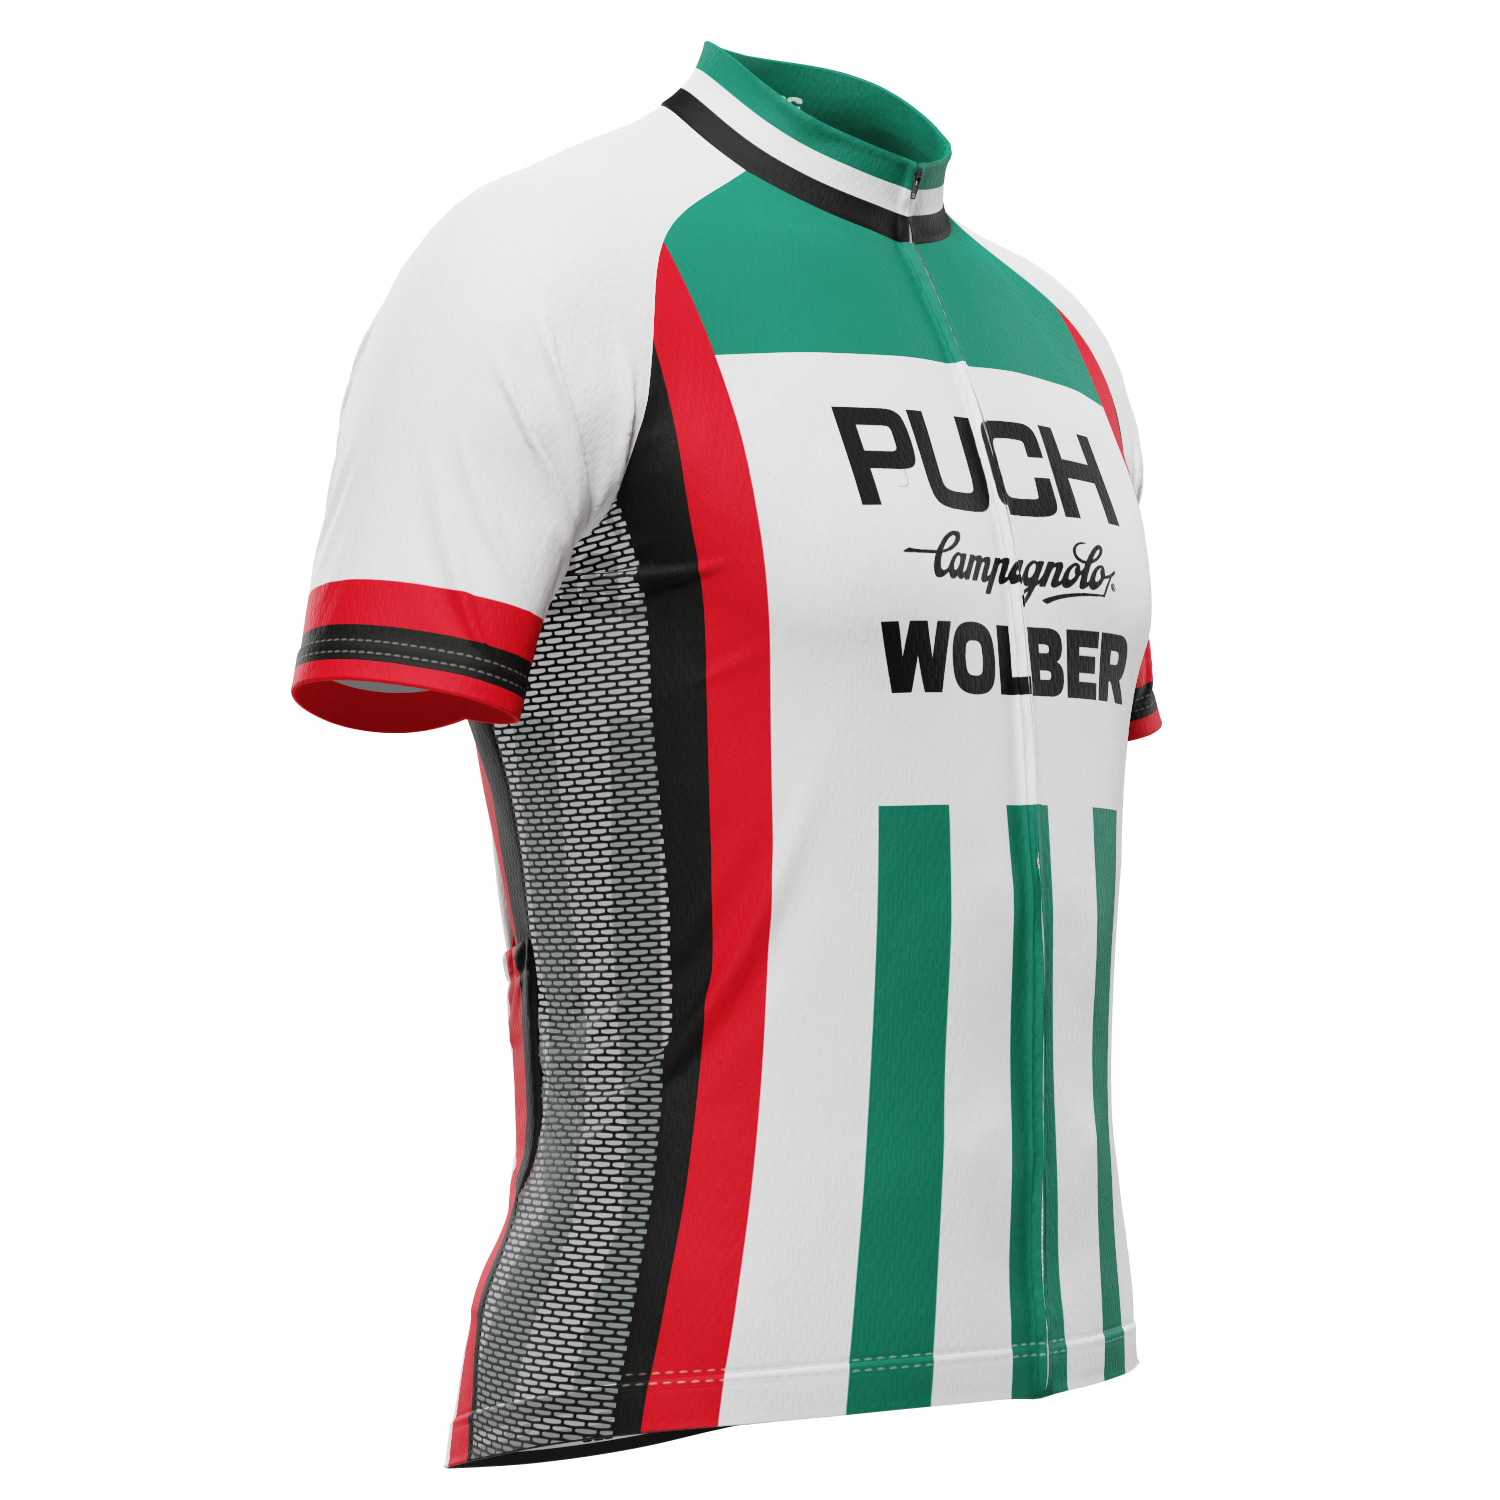 Men's Retro 1981 Puch Campagnolo Wolber Short Sleeve Cycling Jersey